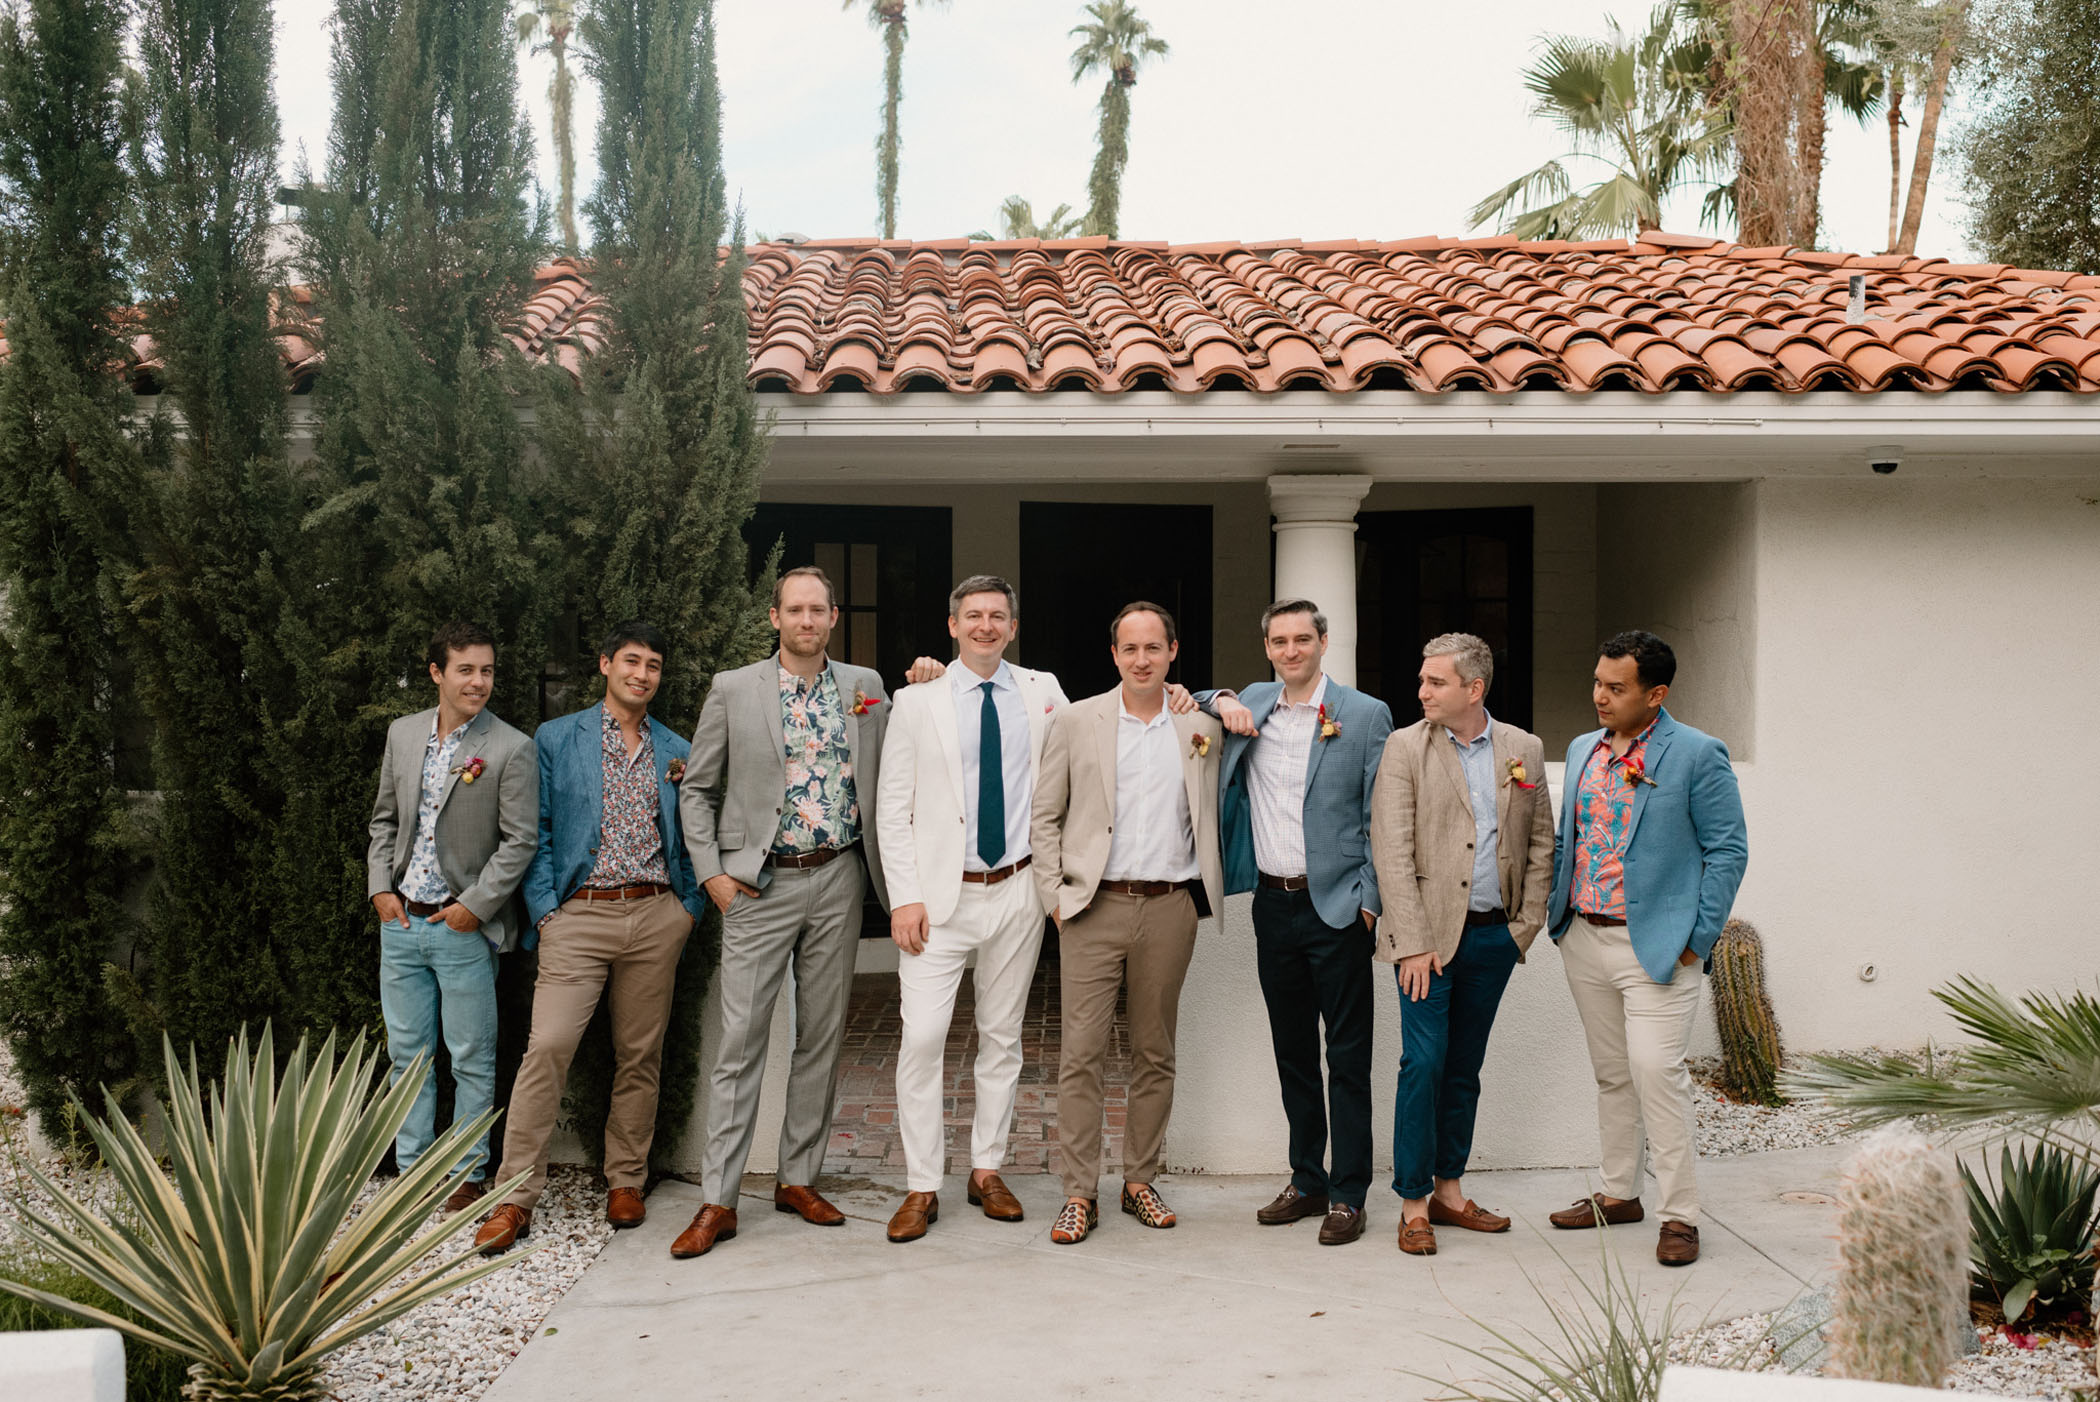 Colorful and Vibrant Palm Springs WeddingColorful and Vibrant Palm Springs Wedding Groomsmen